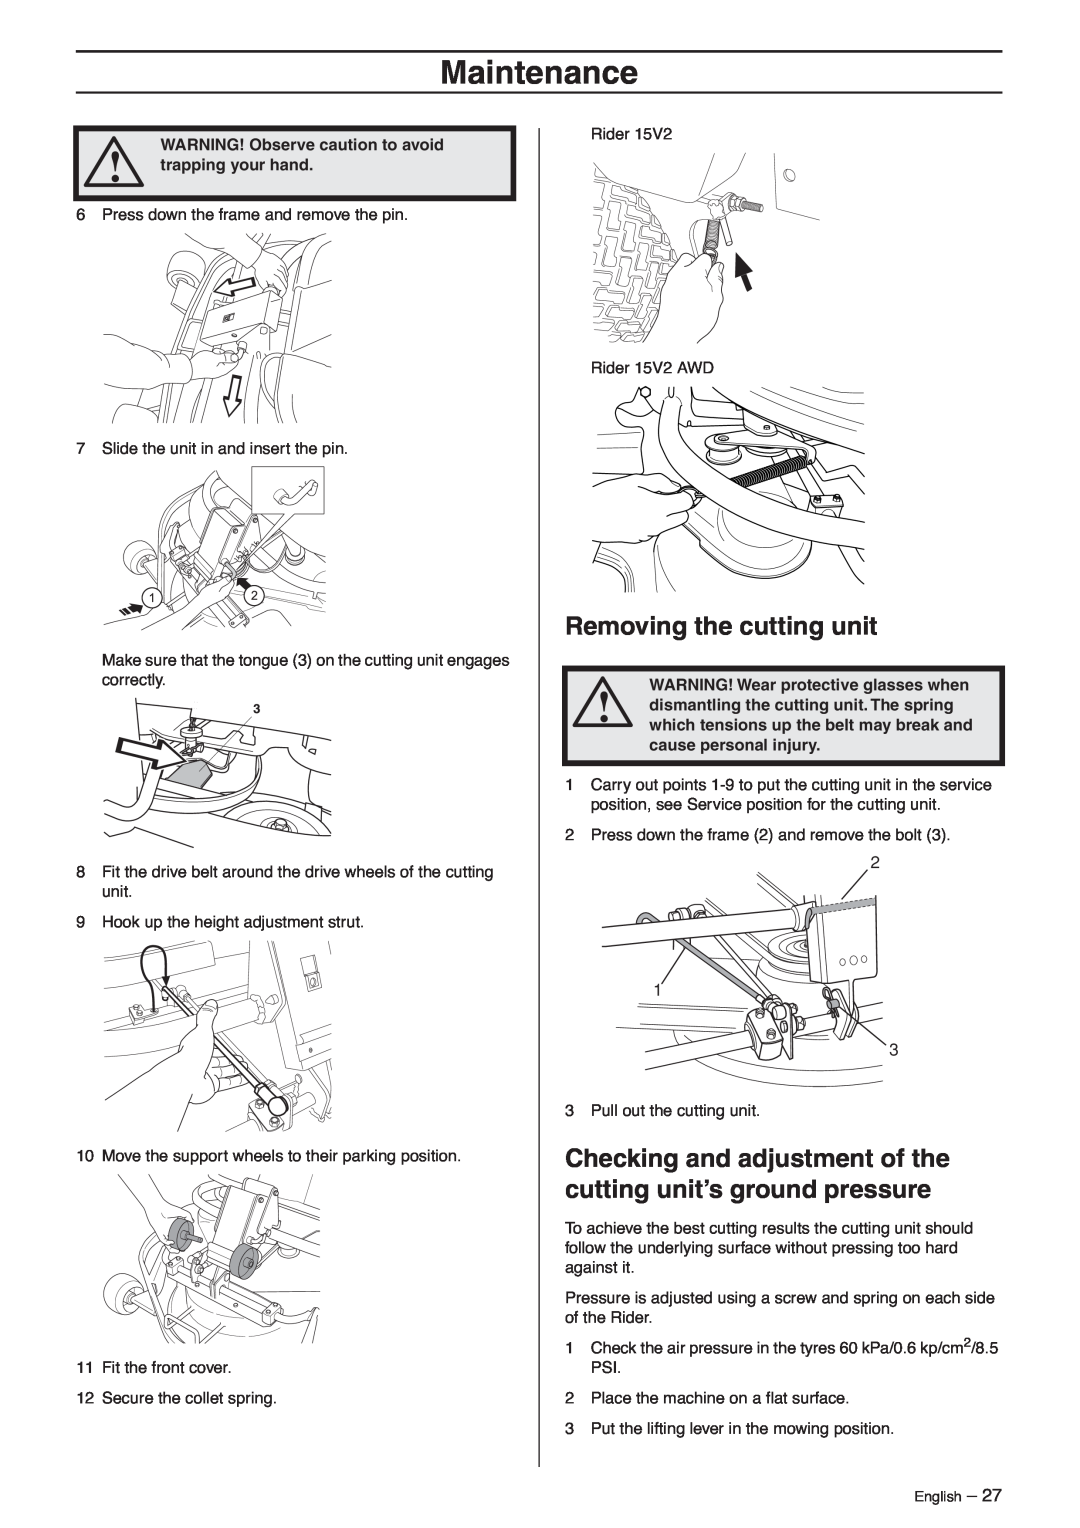 Husqvarna 15V2s AWD manual Removing the cutting unit, WARNING! Observe caution to avoid, trapping your hand, Maintenance 